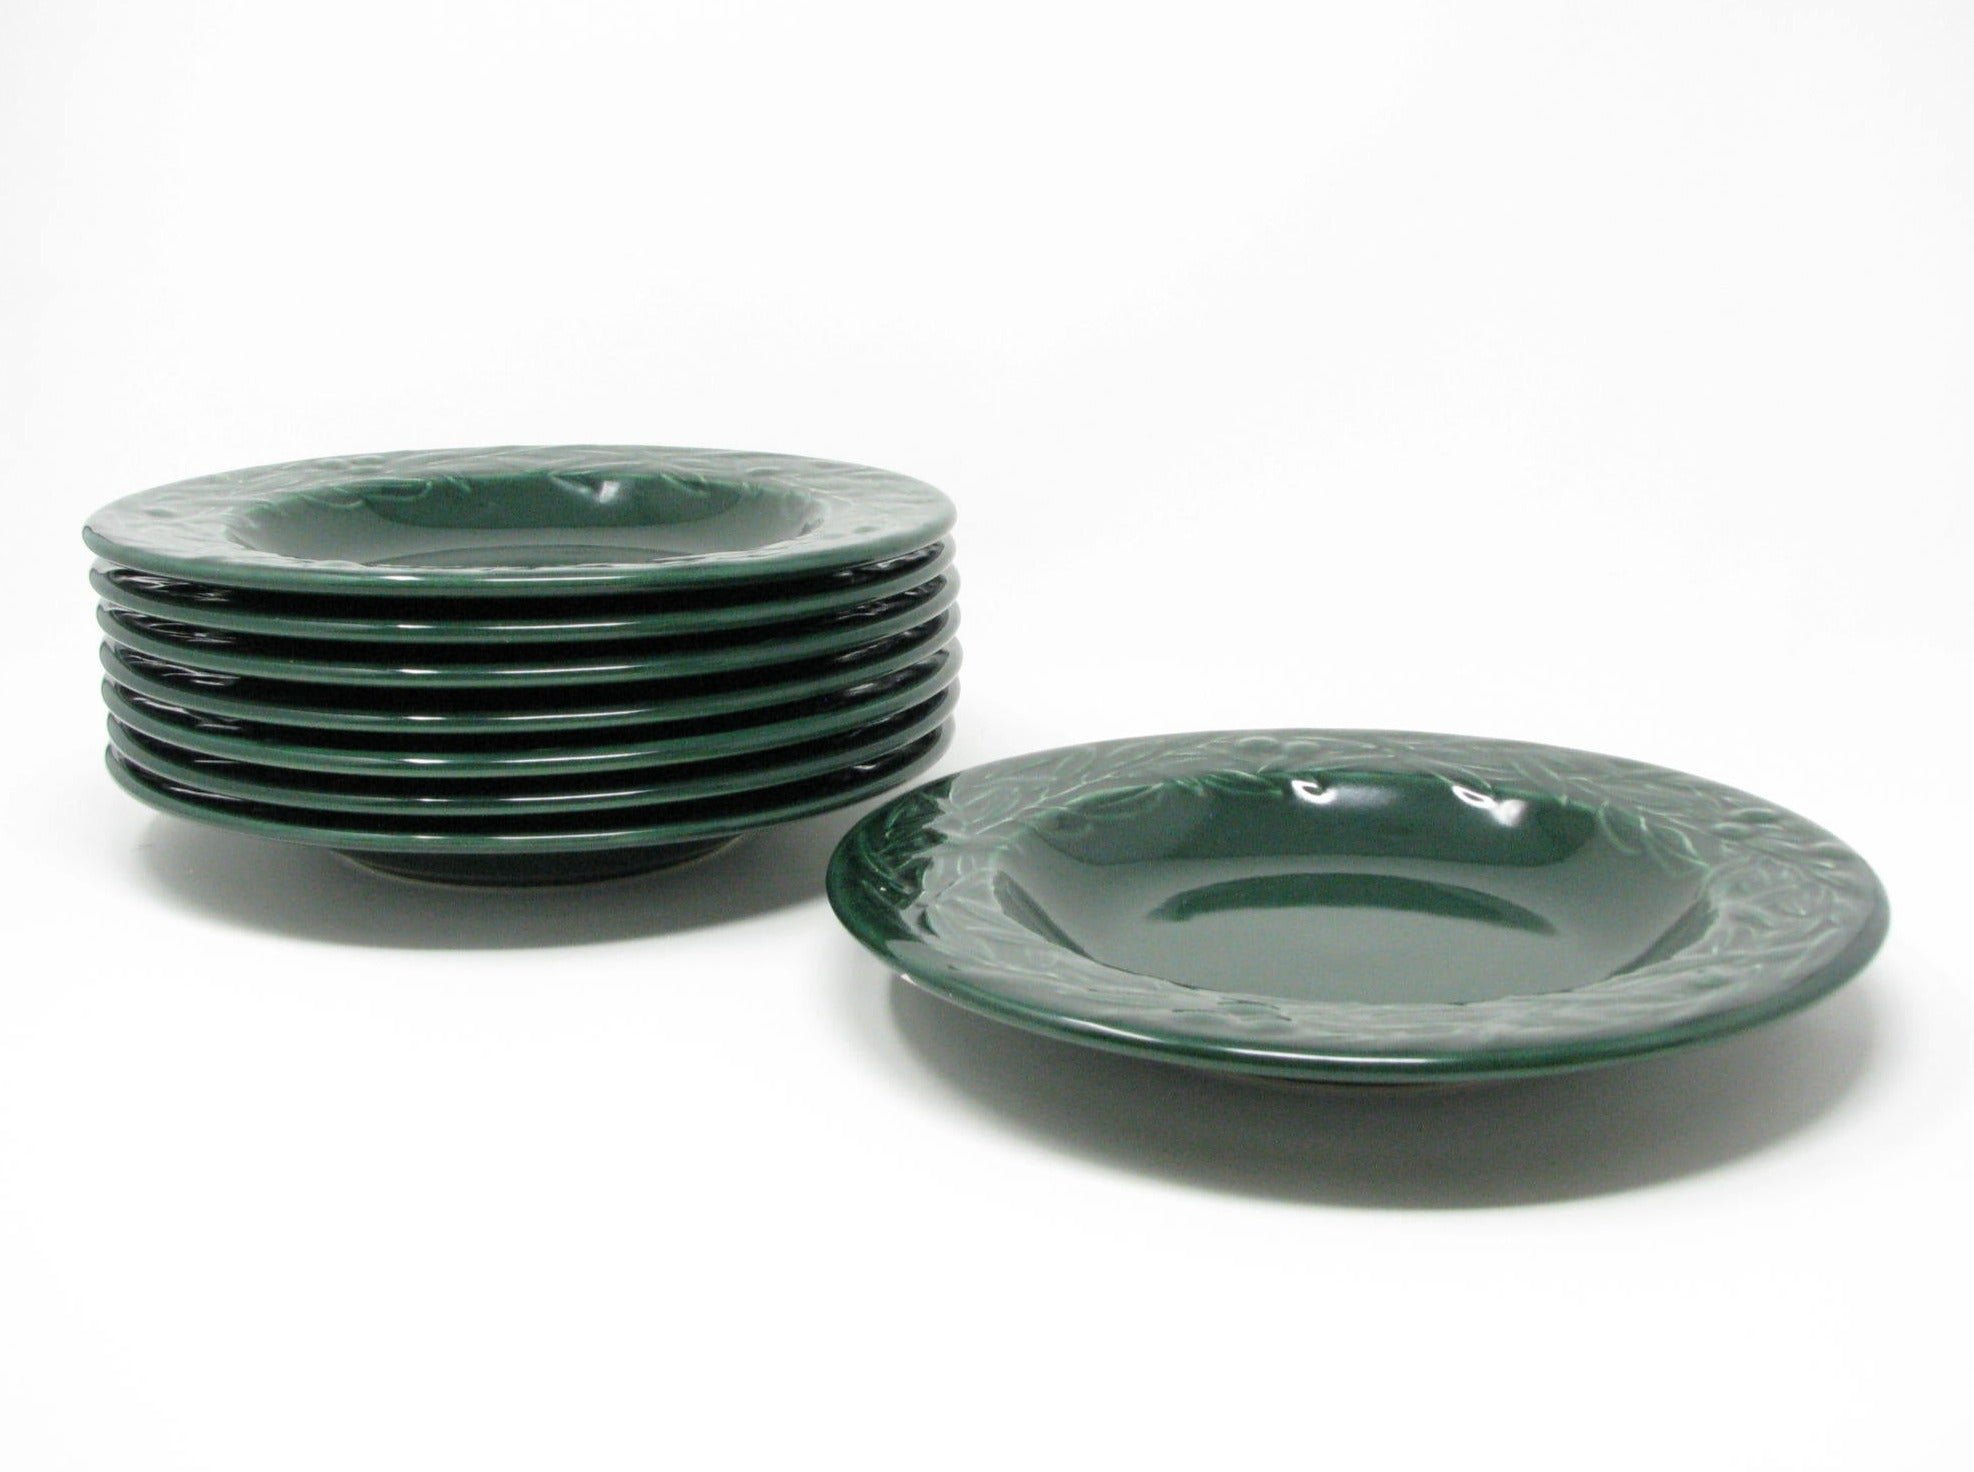 edgebrookhouse - Vintage Varages France Dark Green Bowls with Foliage and Berries - 8 Pieces